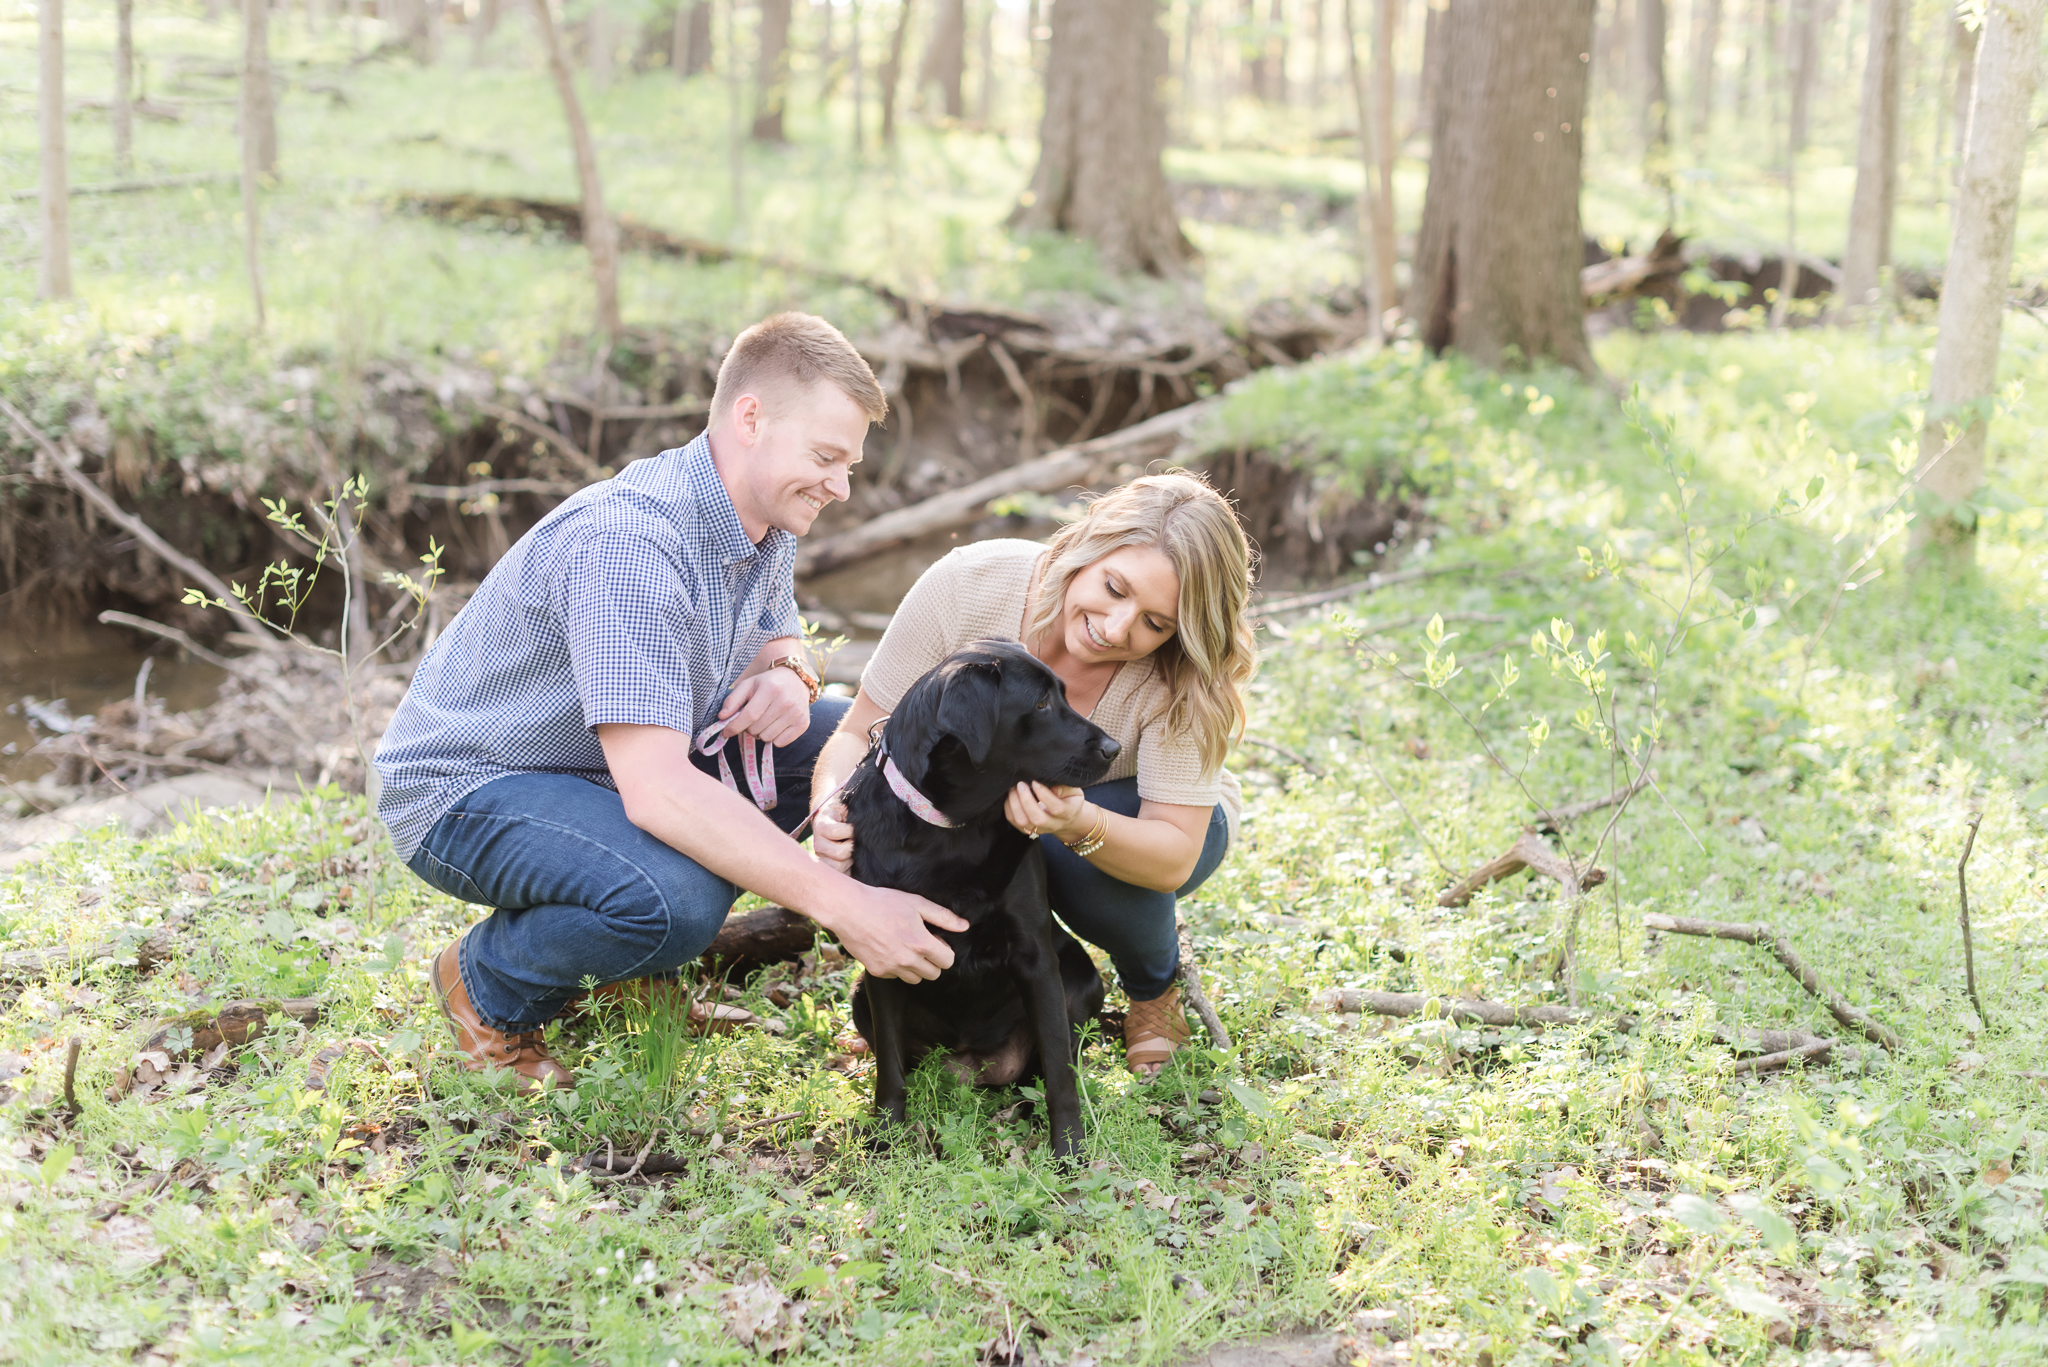 Richie Woods Nature Preserve and Mustard Seed Gardens Engagement Session Wedding Photos-19.jpg